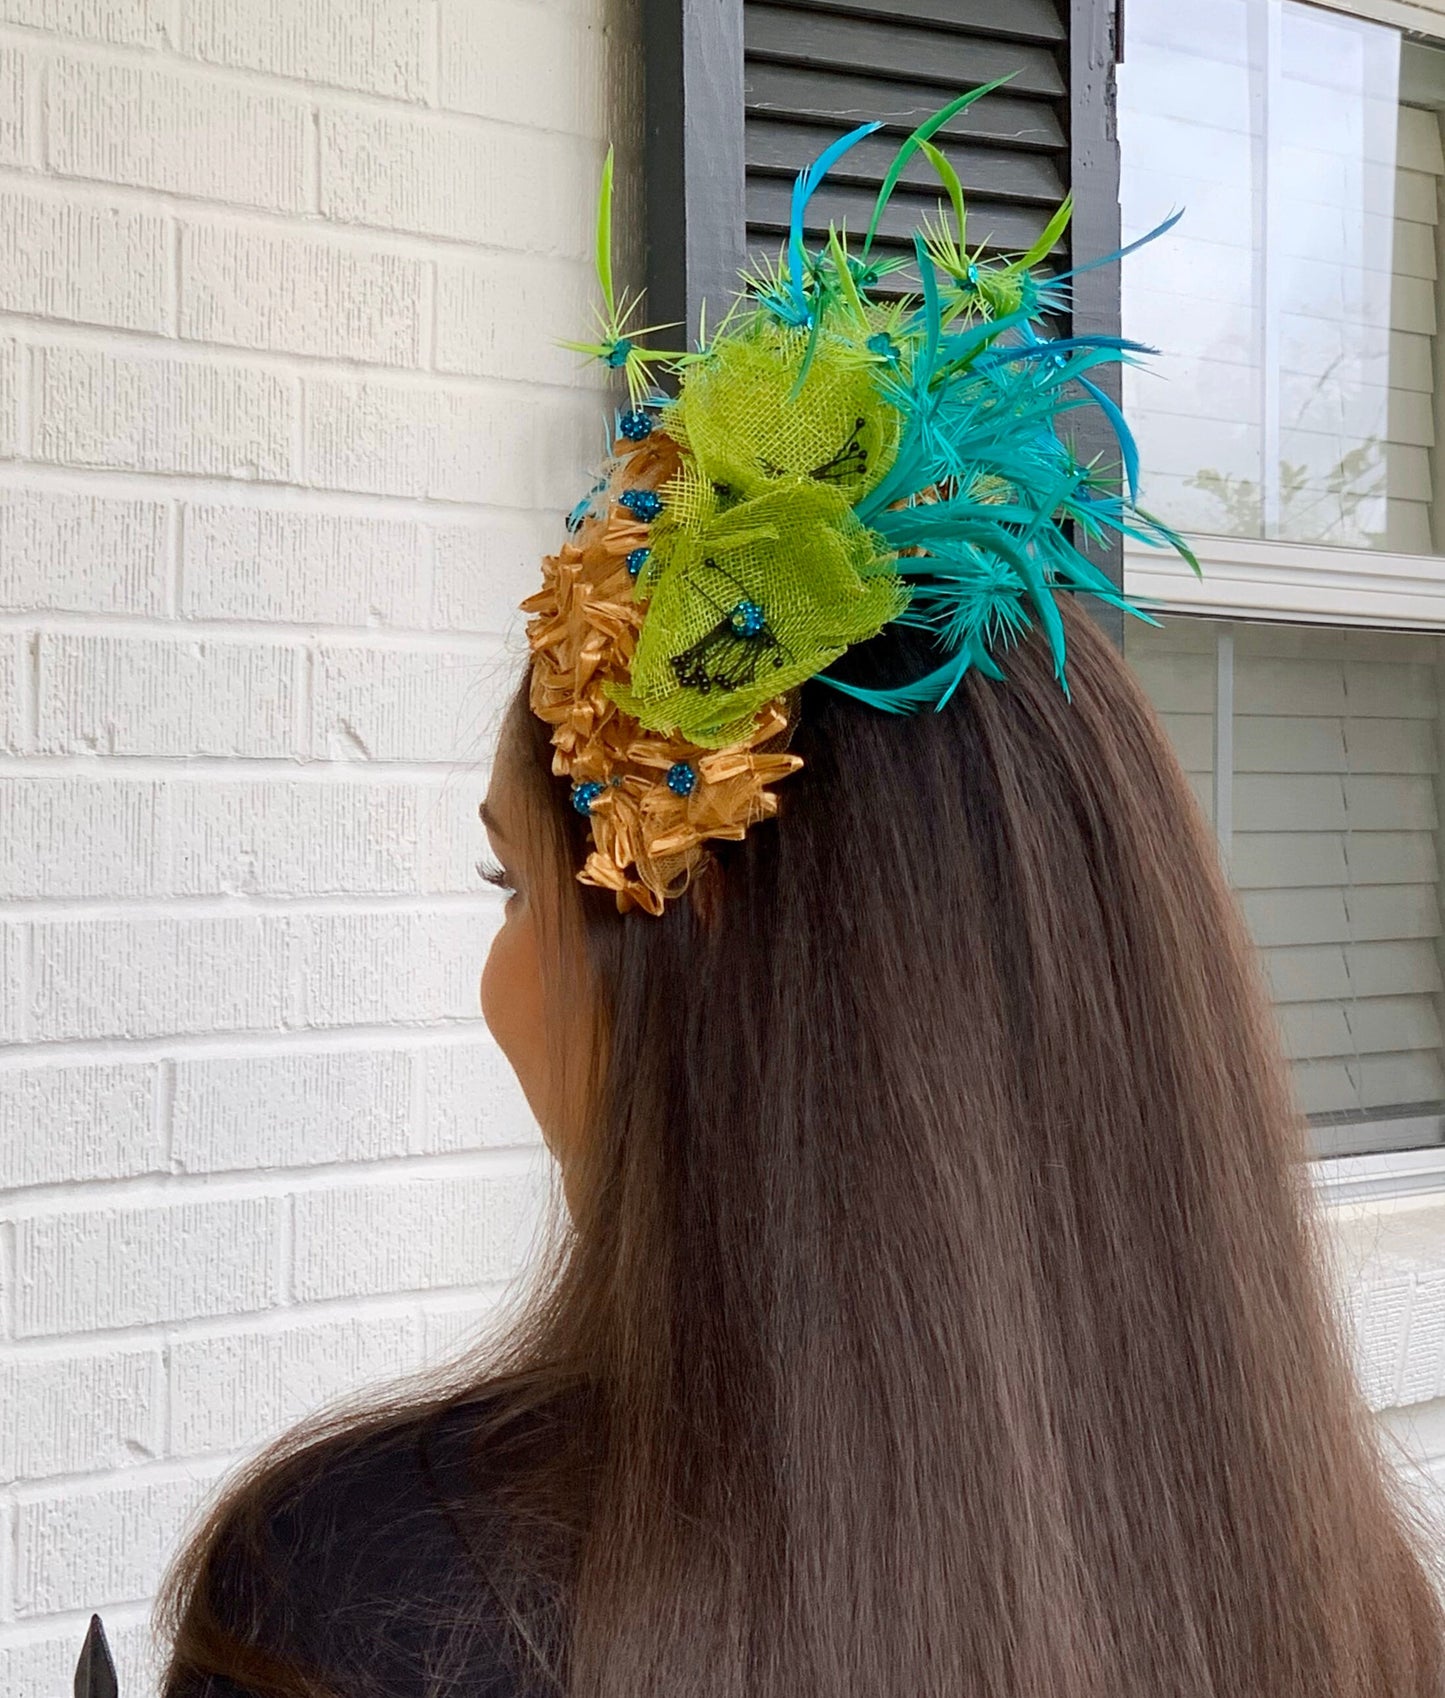 Spring-Summer Fascinator! Bright green-turquoise flowers with natural vintage braided straw trim-turquoise beads-racetrack-party-wedding-hat